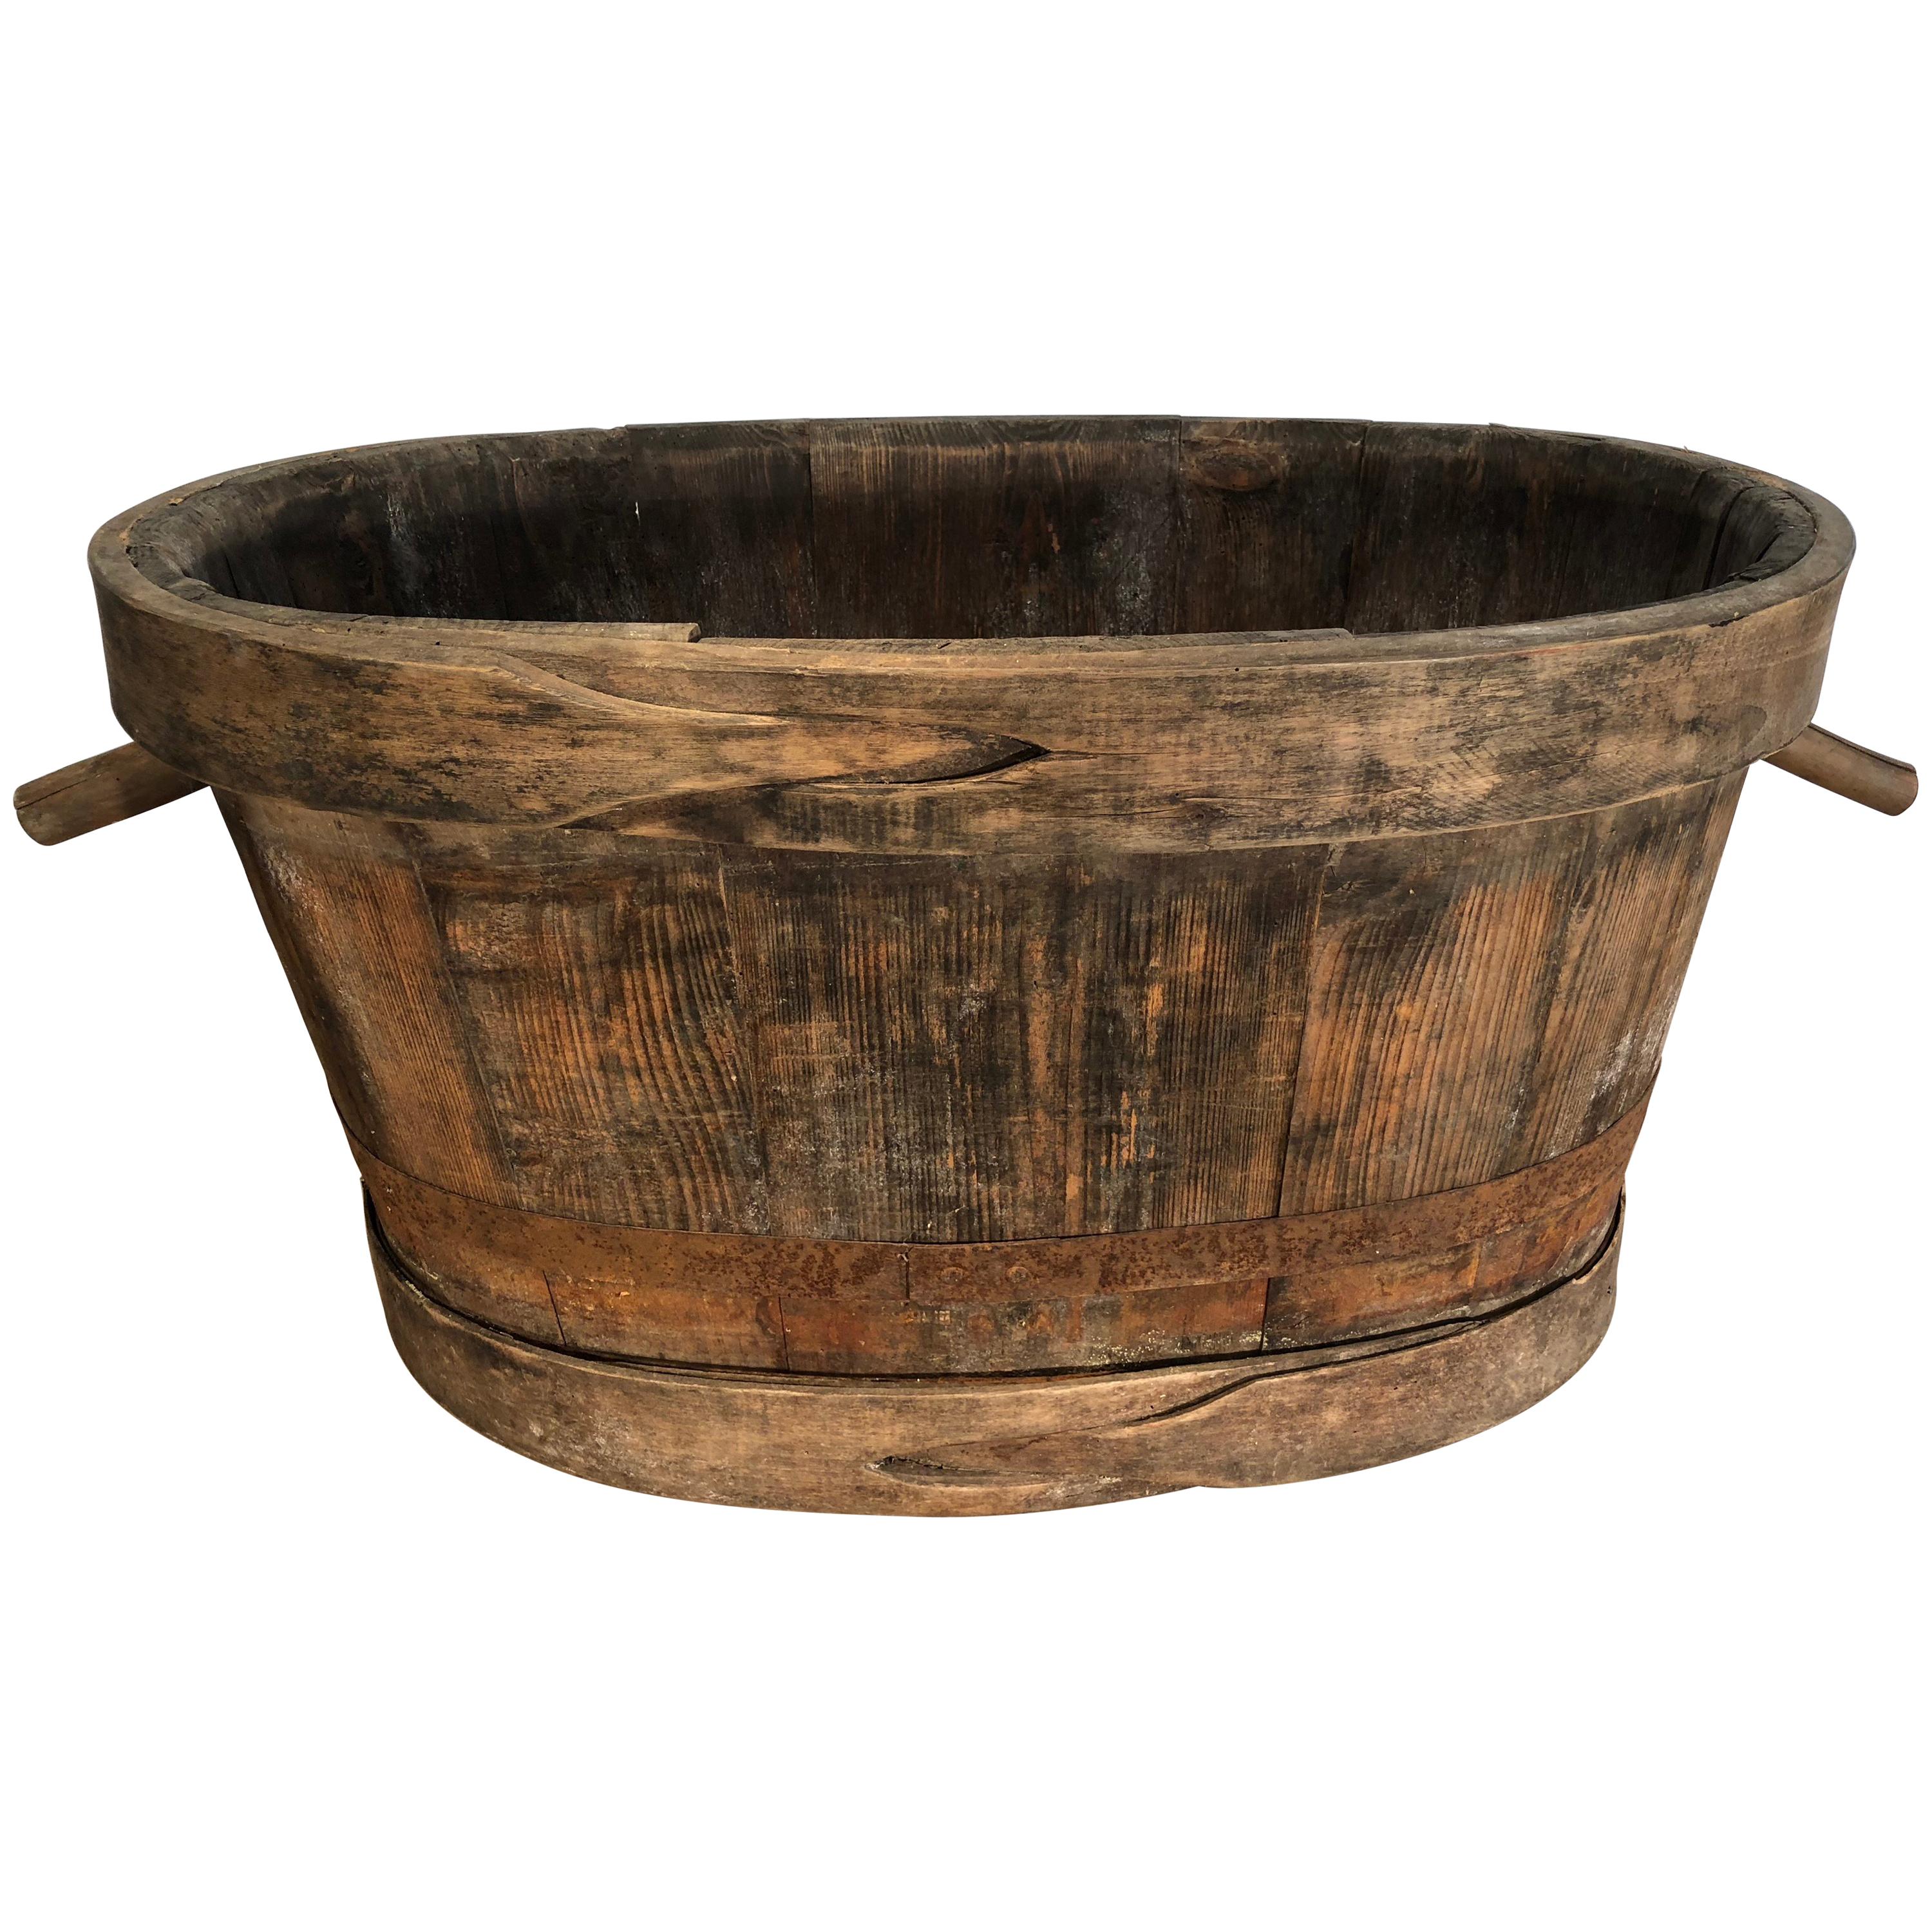 Large French Wooden Vendange Bucket from Burgundy